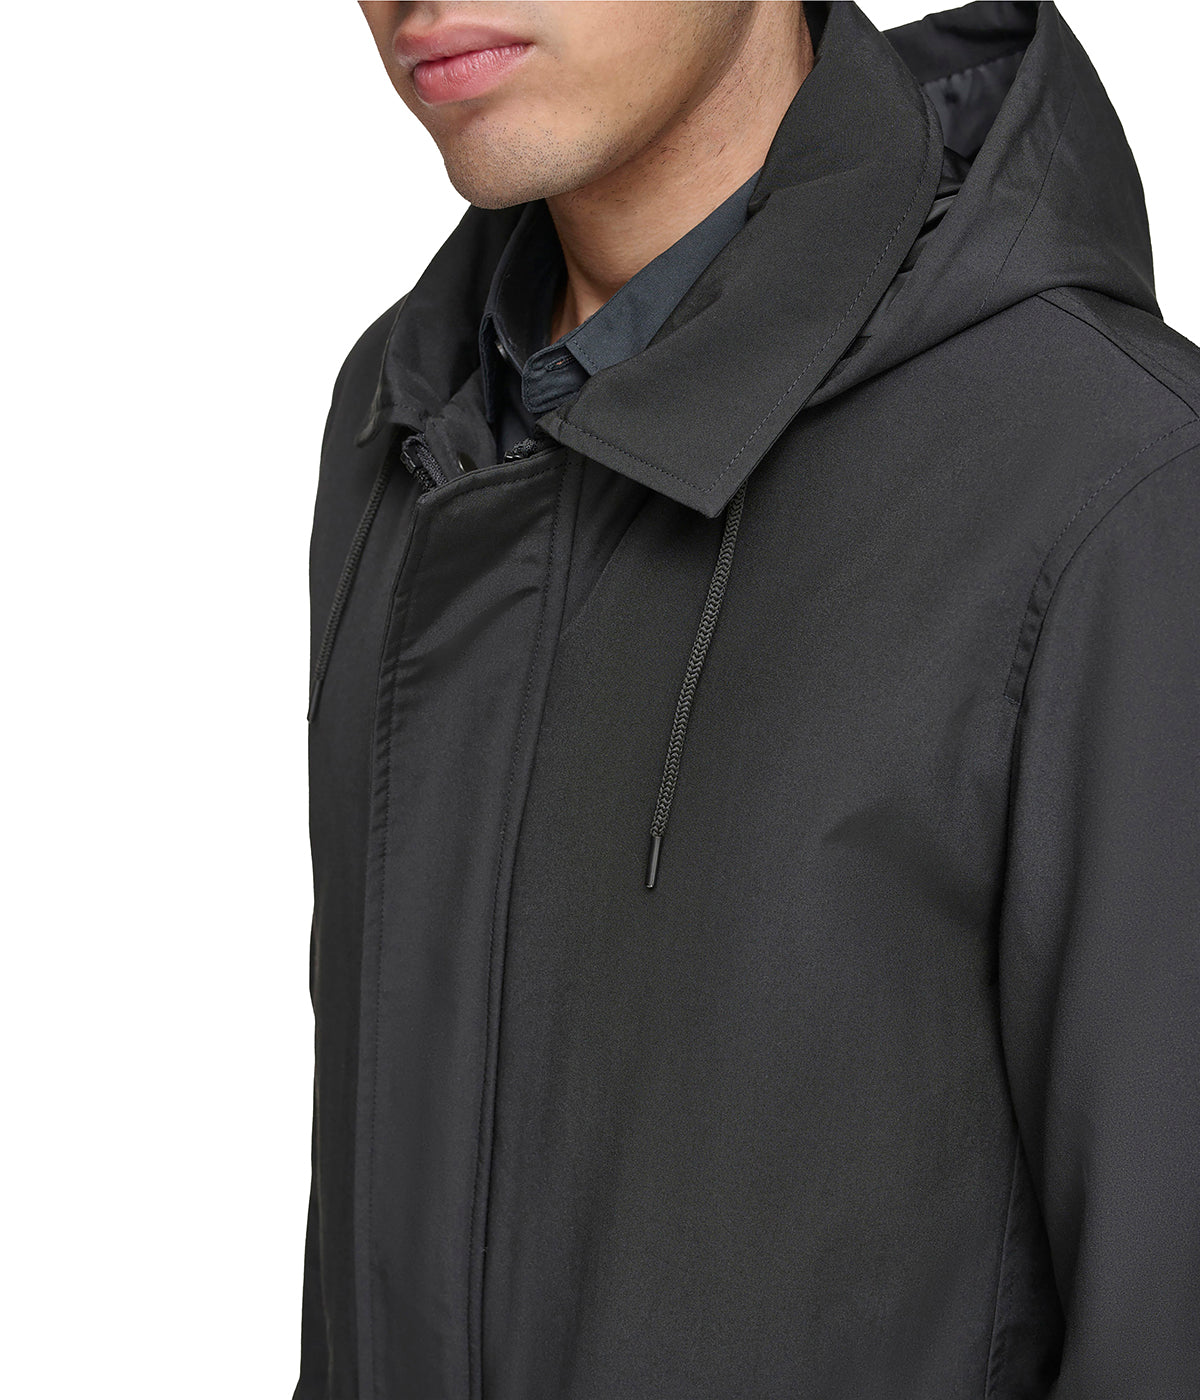 Merrimack 36" Topper with Attached Inner Bib and Hood Black